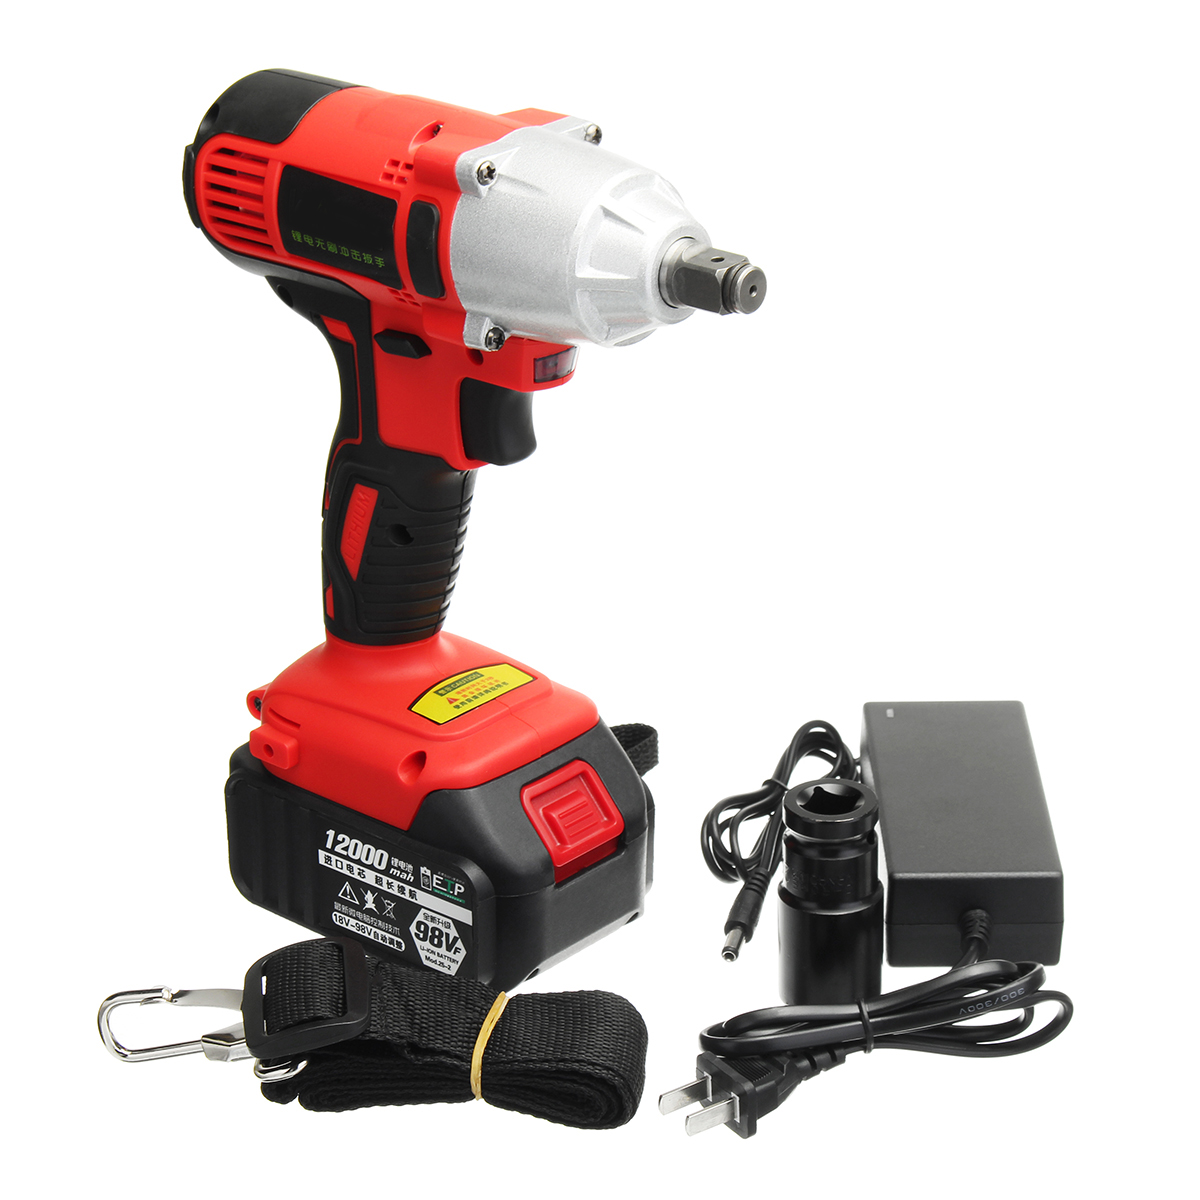 Electric-Wrench-98V-Lithium-Ion-Cordless-Impact-Wrench-Brushless-Motor-Power-Wrench-Tools-1310565-10